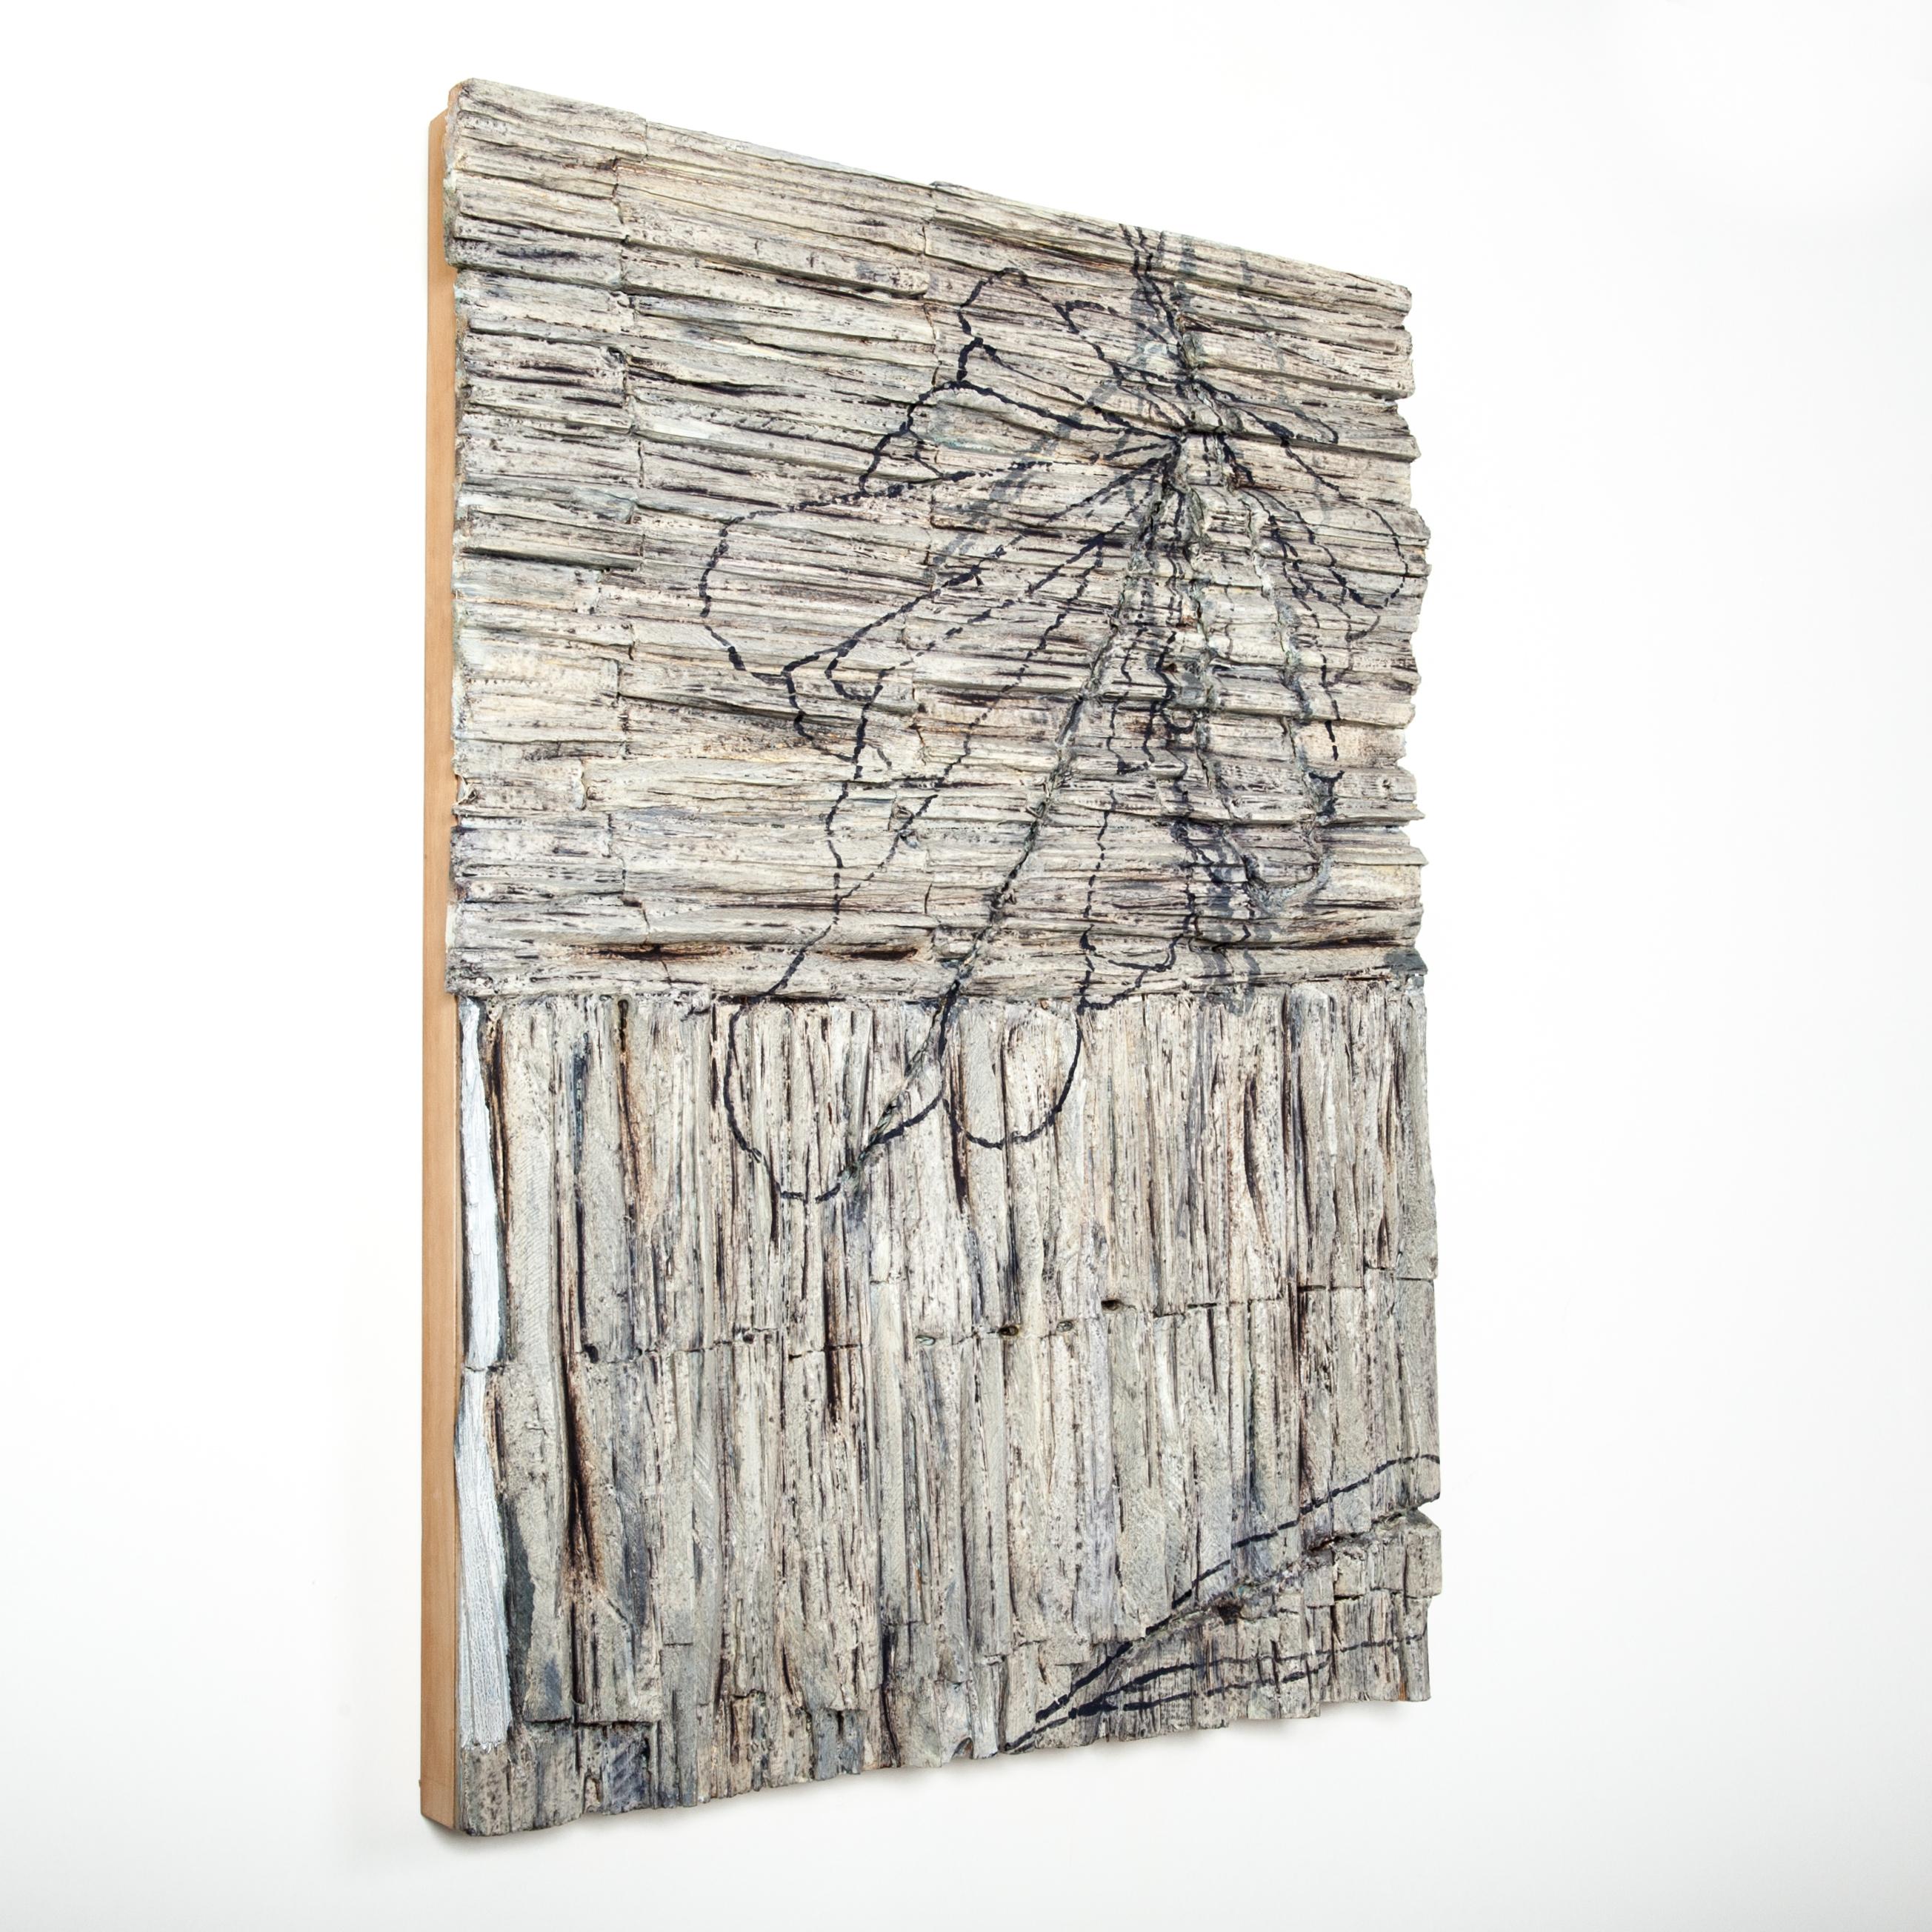 Contemporary wooden sculpture-painting created by circular sawing, greige-grey-anthracite painted on white-stuff.
Signed by hand Christofer Kochs, 2007

CHRISTOFER KOCHS 
Biographie:
1969   born in Osnabrück, NRW 
1989  A-level 1990  assistance in